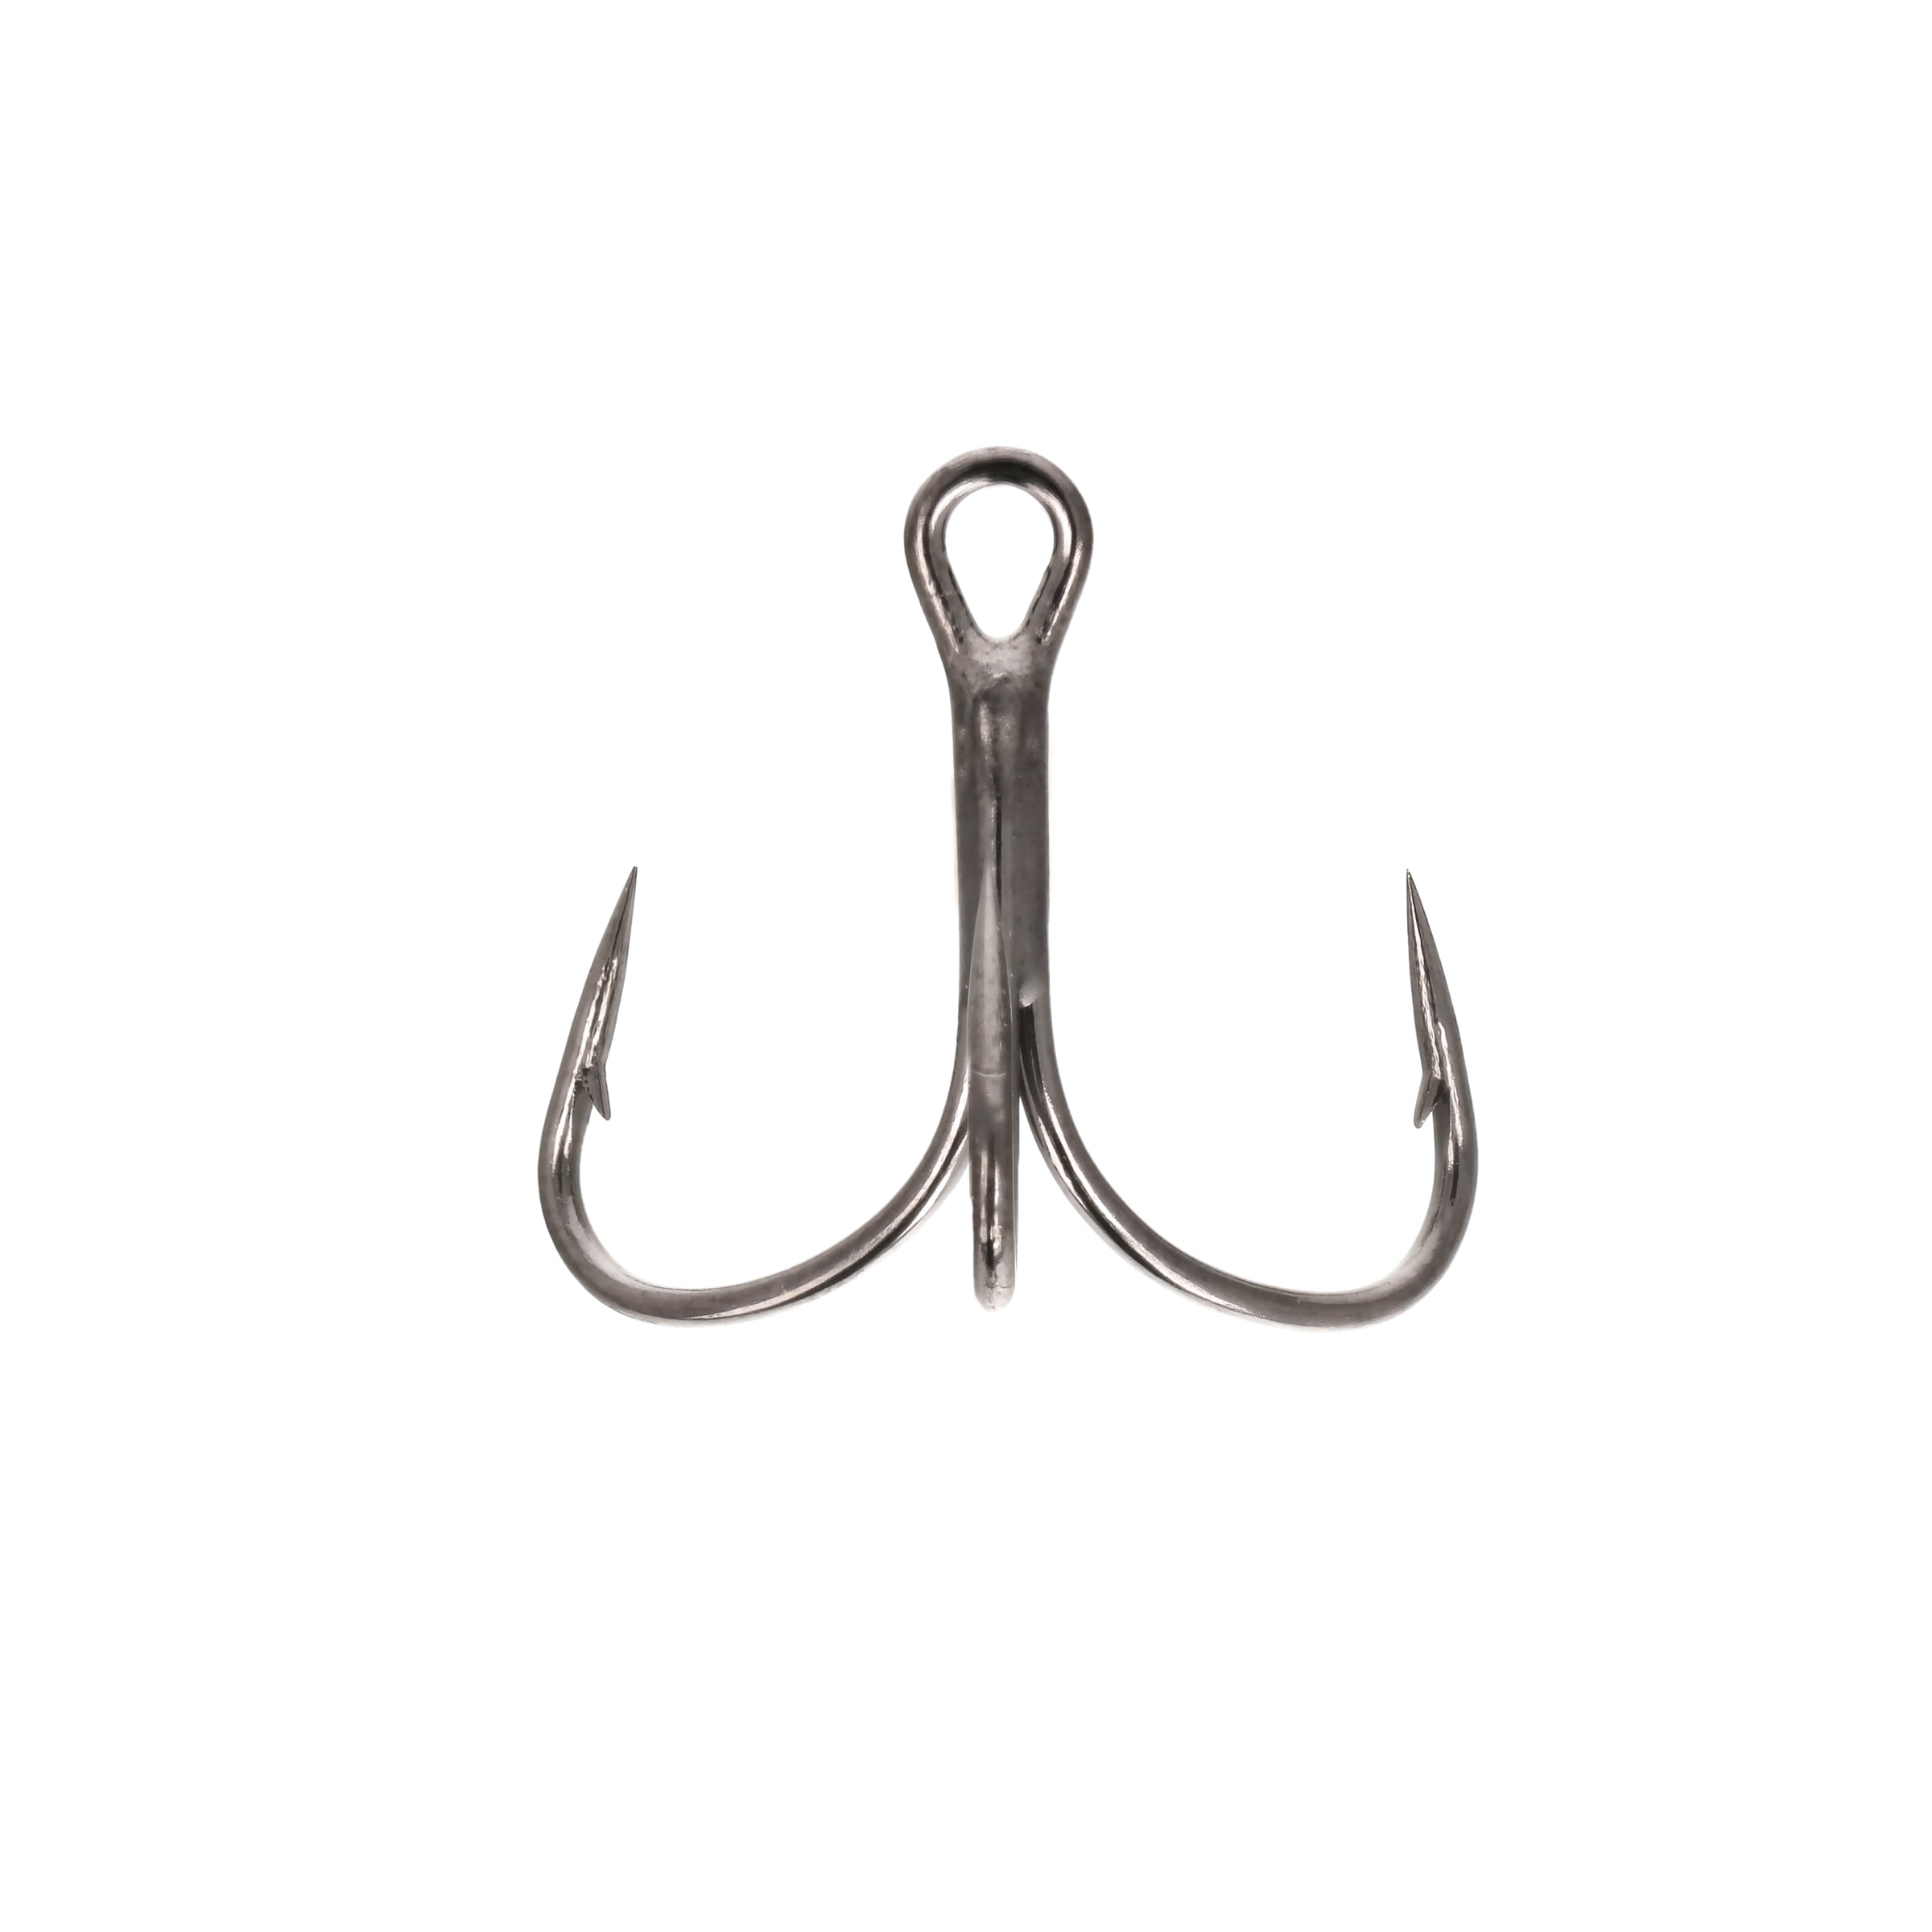 CLOSEOUT* EAGLE CLAW TRO KAR SCUD HOOK SIZE 6/TK31-6 - Northwoods Wholesale  Outlet